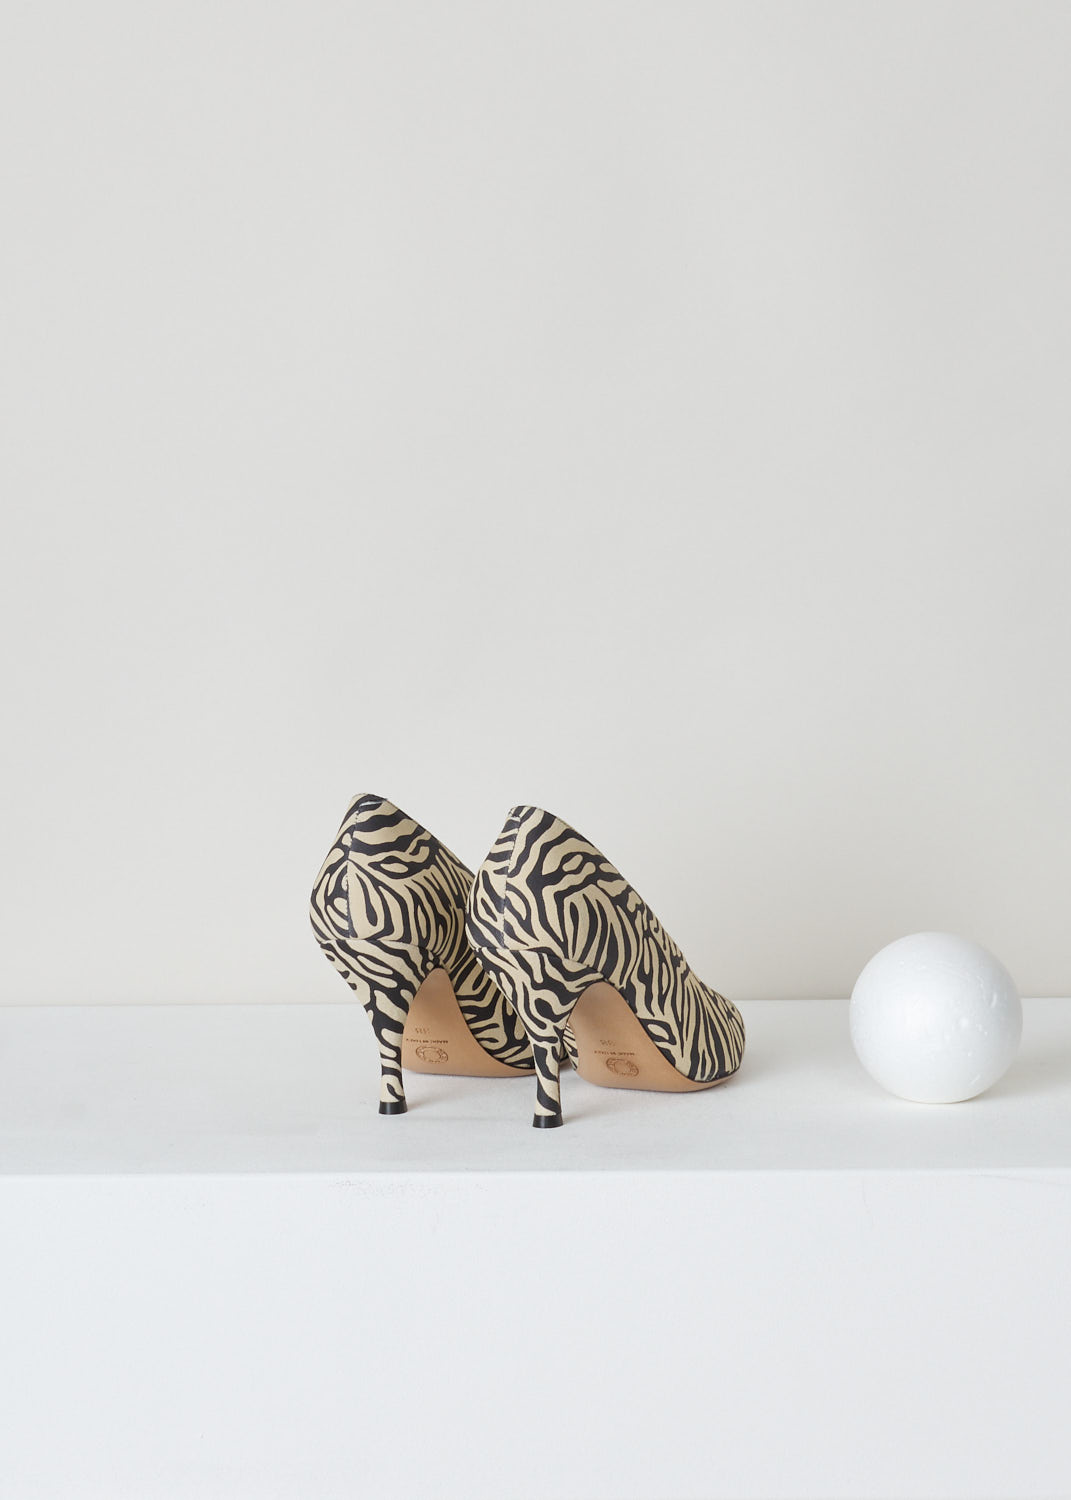 Dries van Noten, Zebra print pumps in black and white, WS27_187_H80_Qback, Leather printed with a zebra print, featuring an pointed toe section and tapered heels. this pumps would fit any occasion either with a dress or some pants.

Heel height: 8.5 cm / 3.3 inch. 